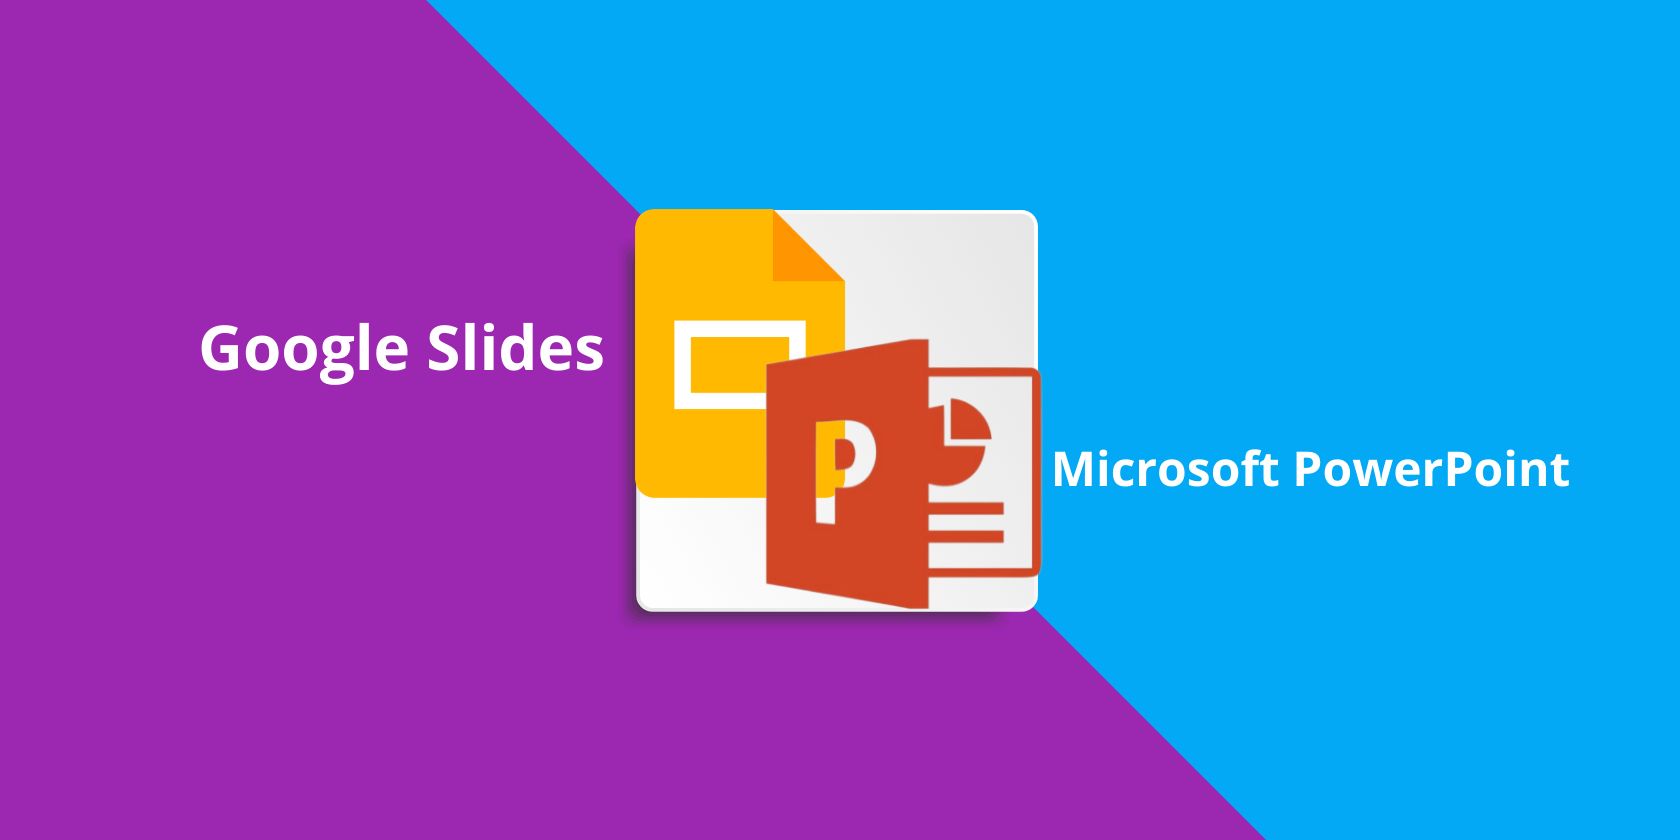 An illustration of Google Slides and PowerPoint logos